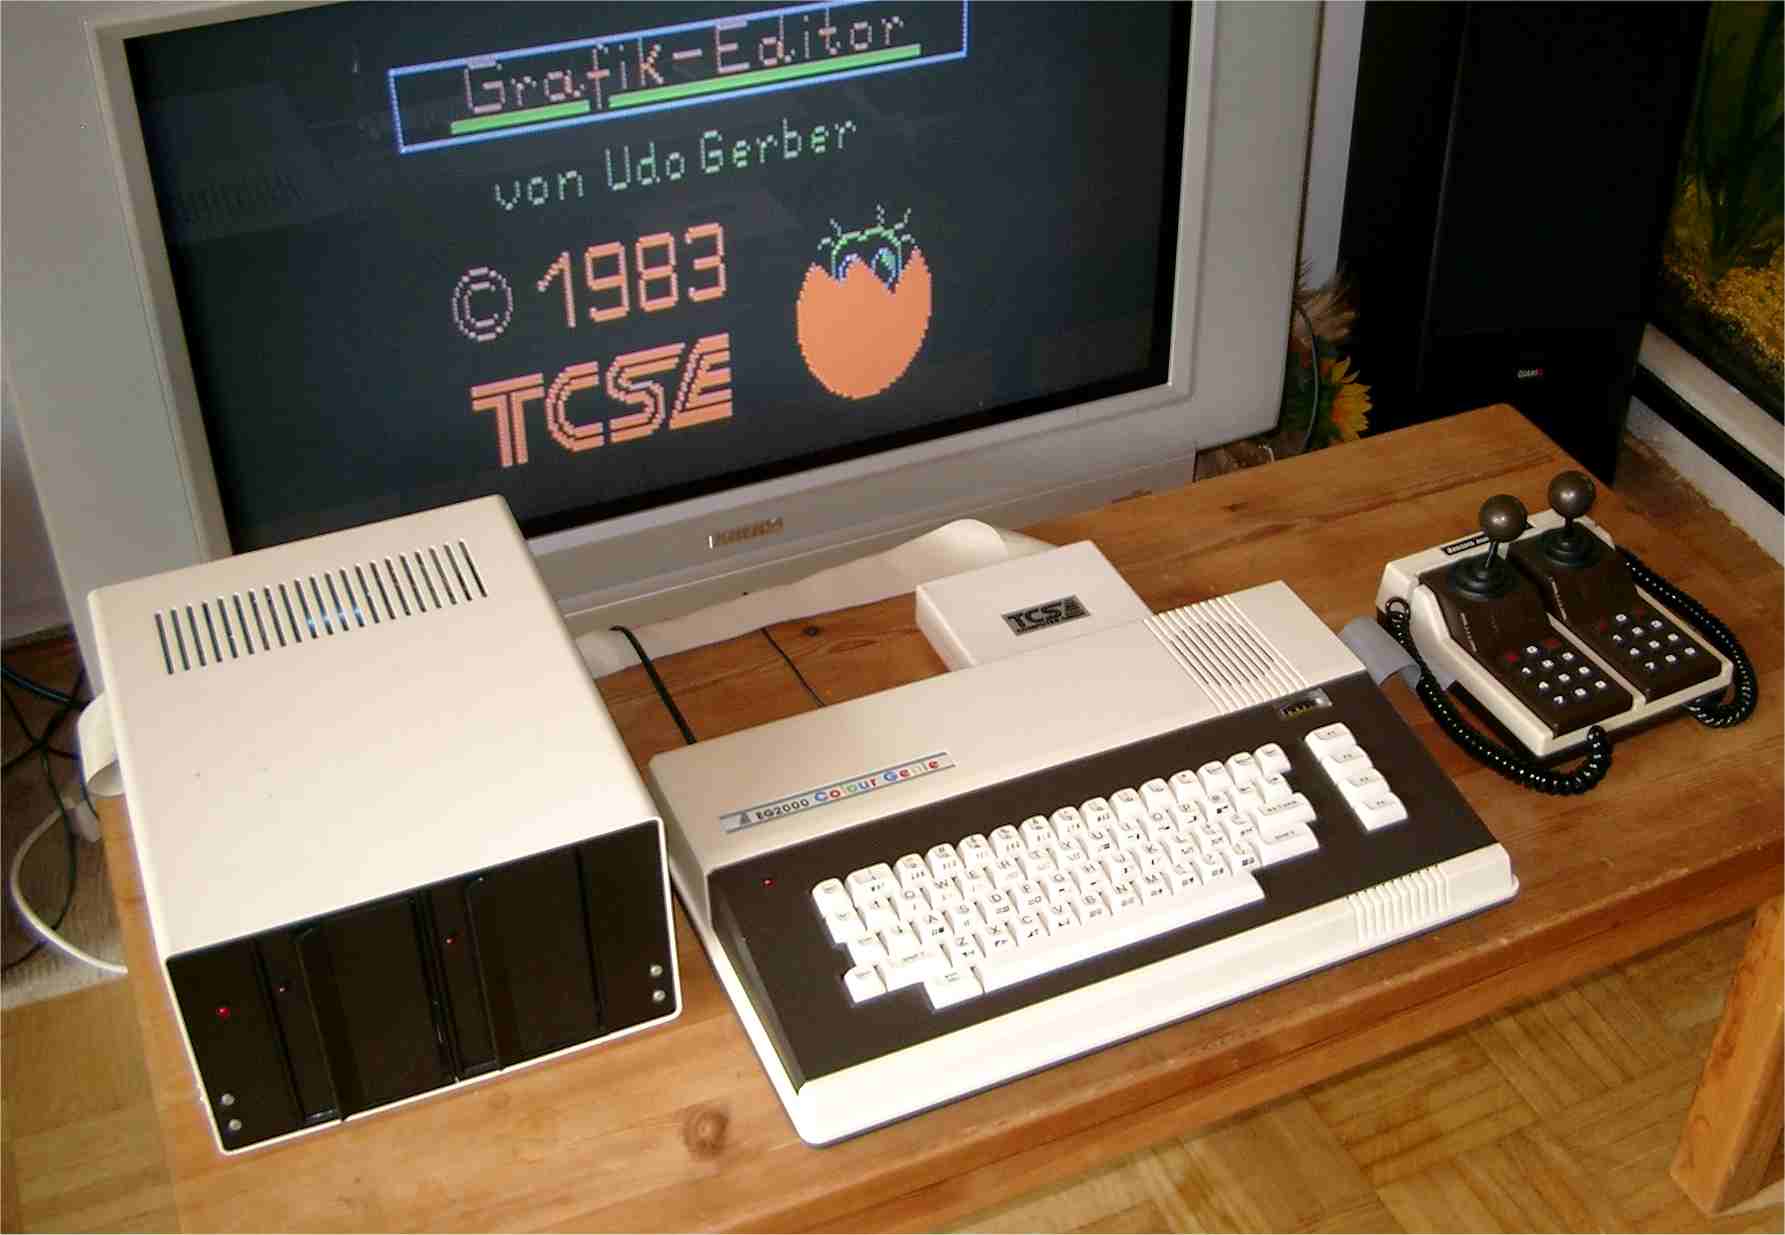 The EACA EG2000 Colour Genie was Jamie's first own home computer which he got for 50 pounds. 